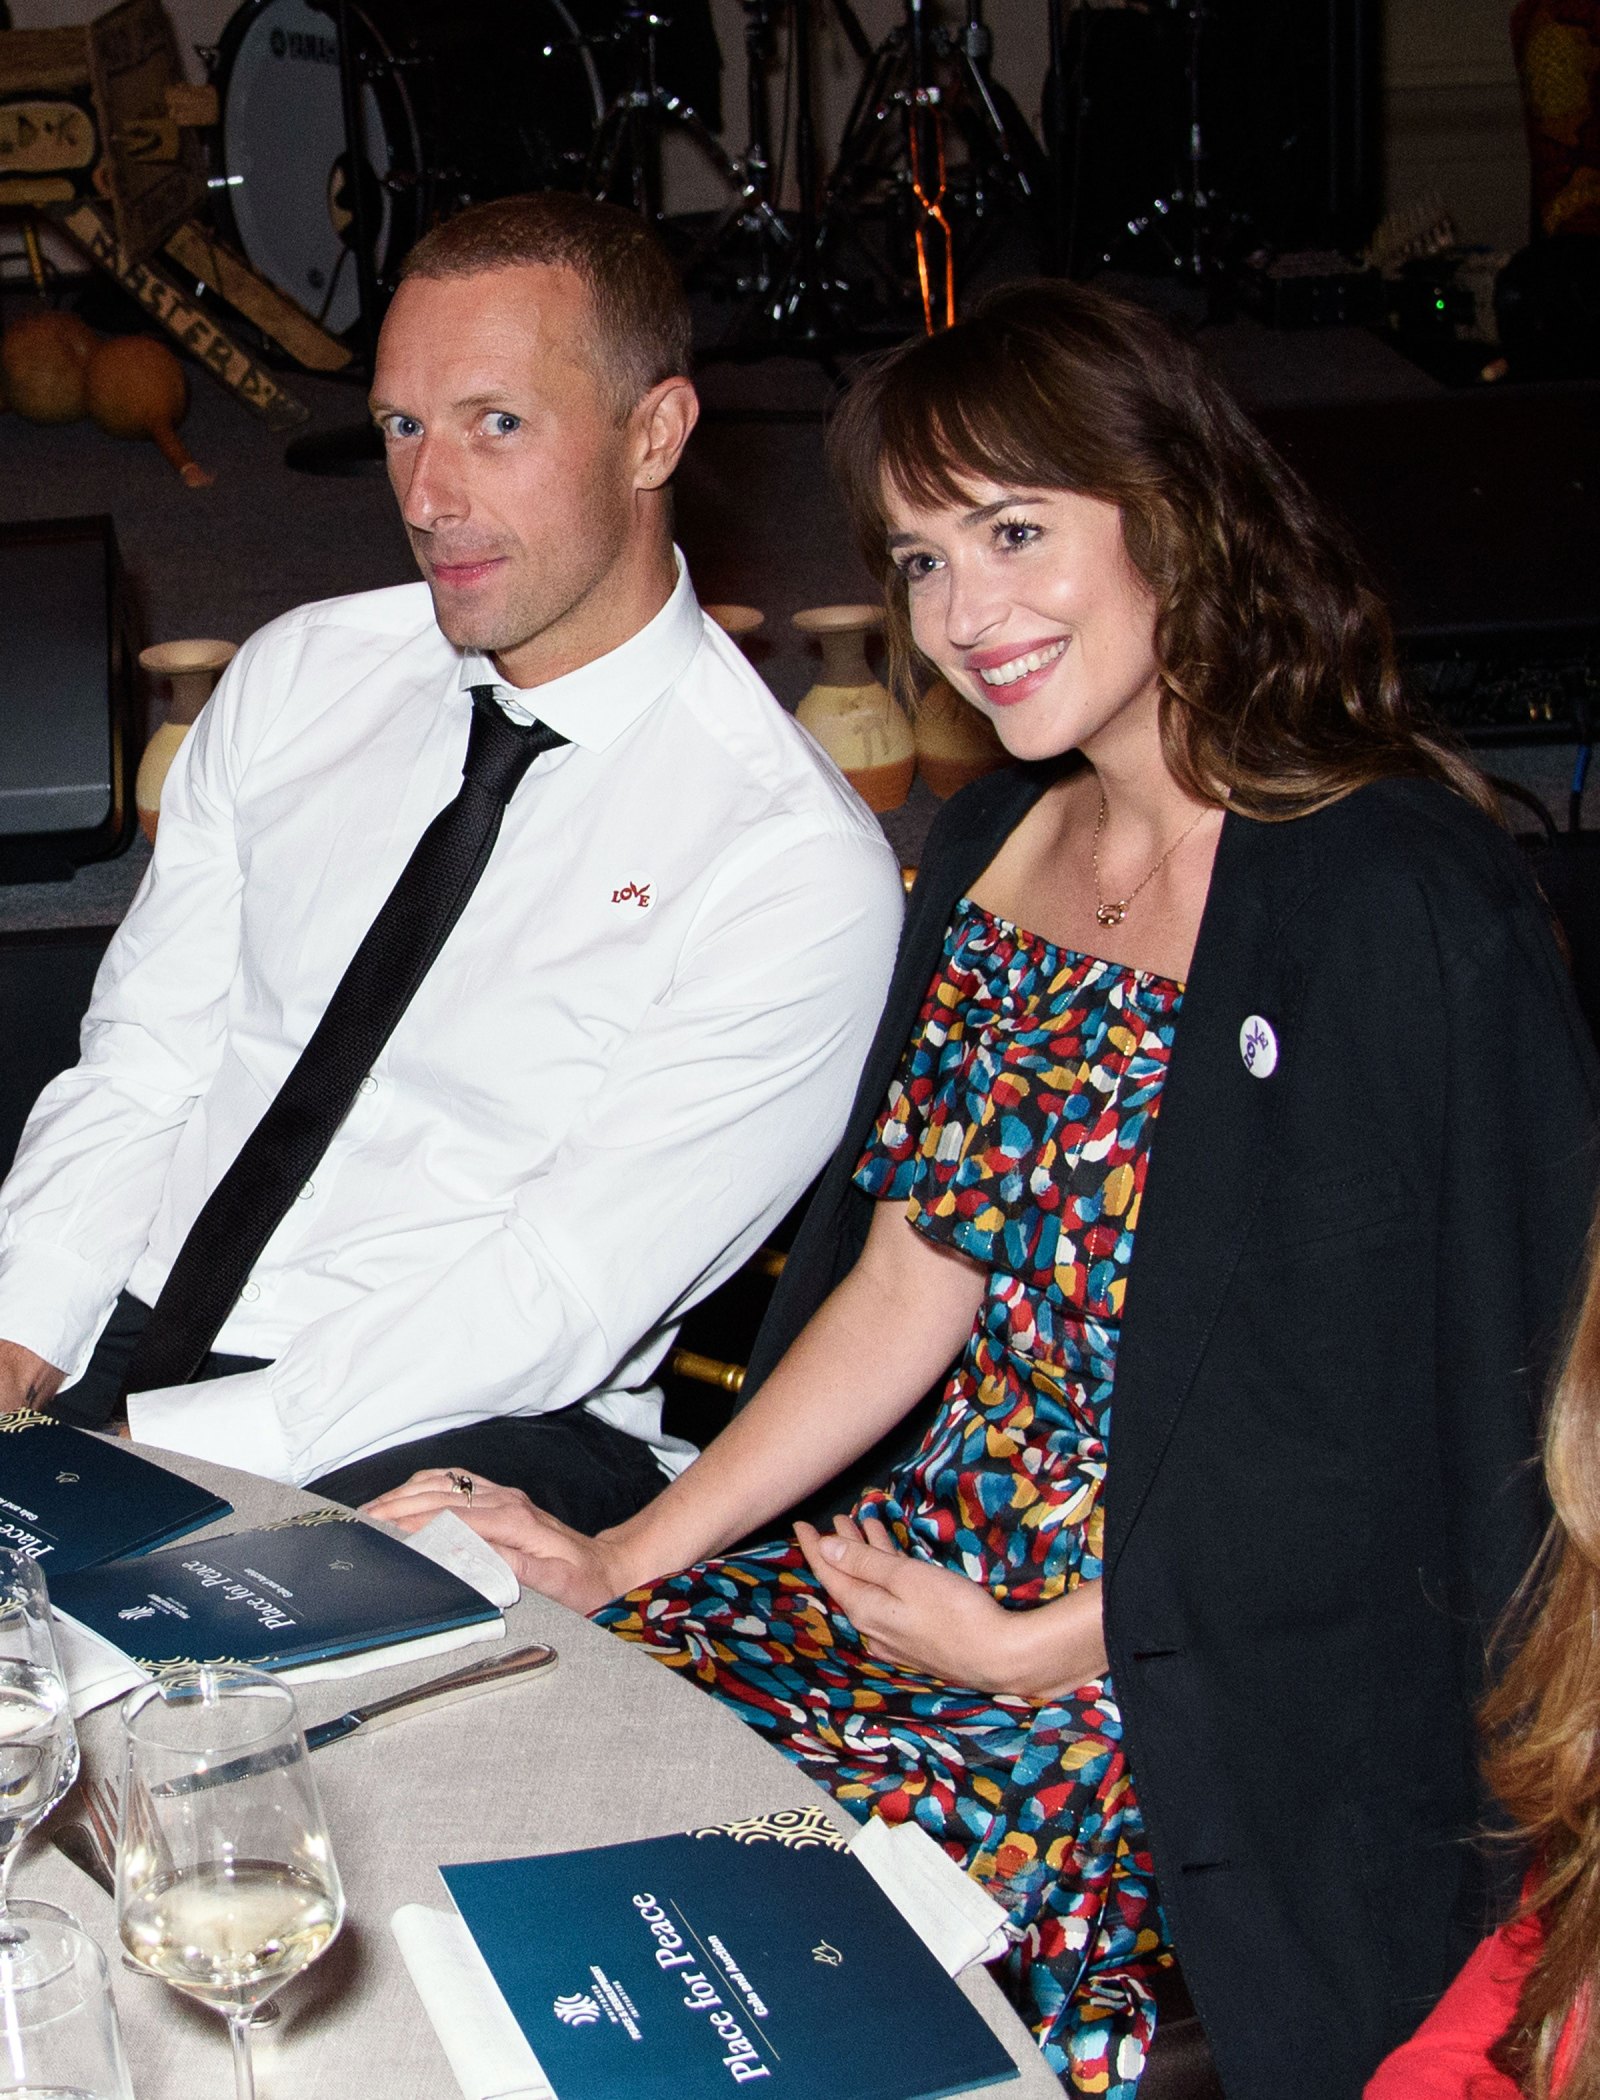 Chris Martin and Dakota Johnson Make Rare Joint Appearance at Event After Reconciliation